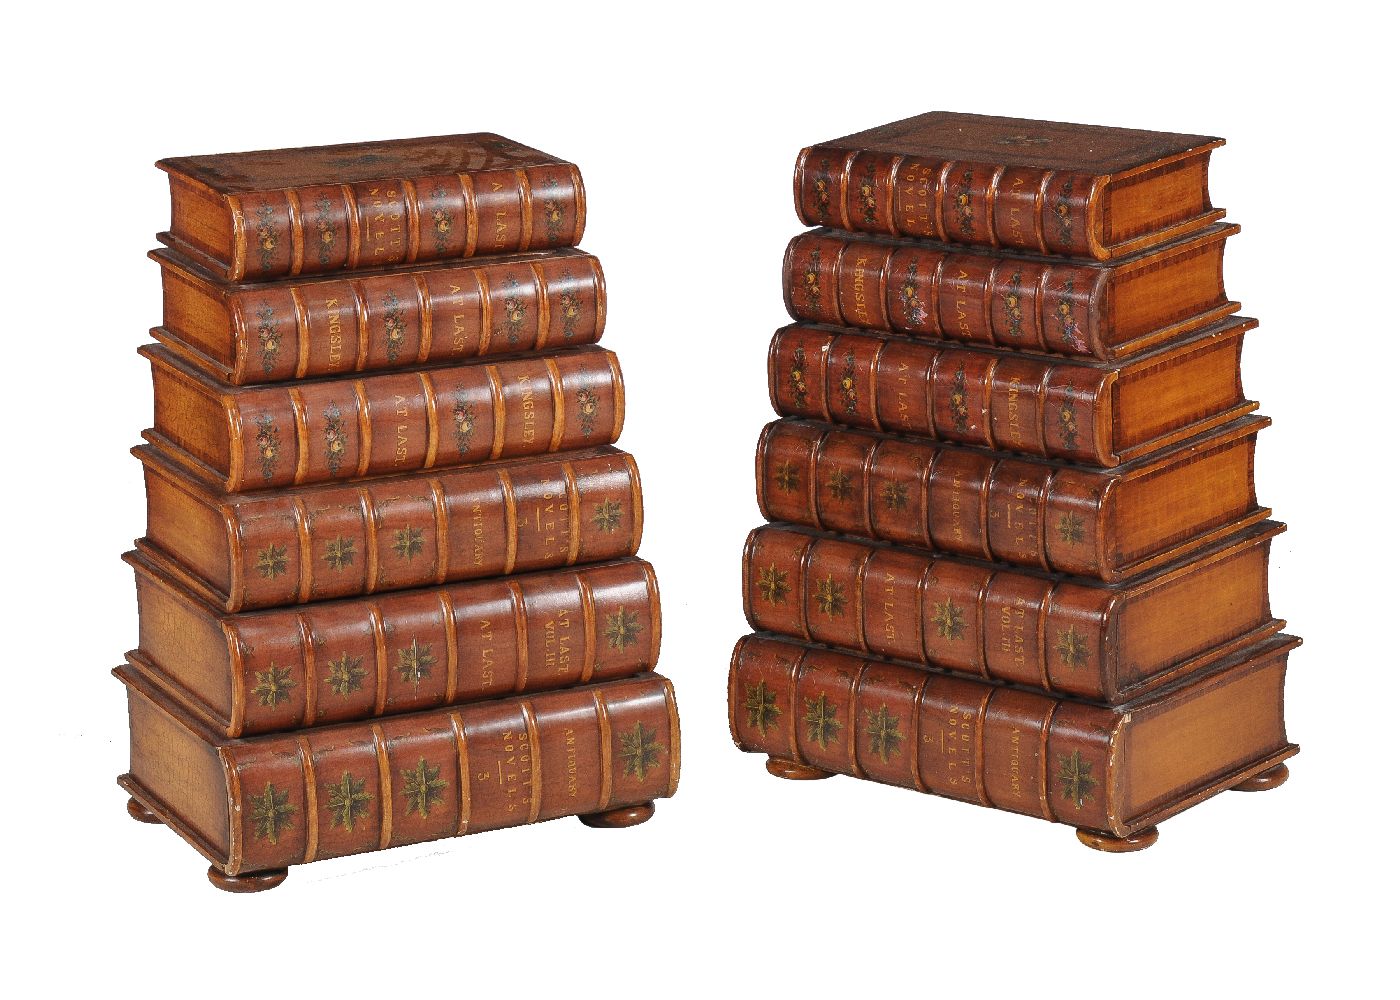 A pair of bedside chests in the form of six false book bindings